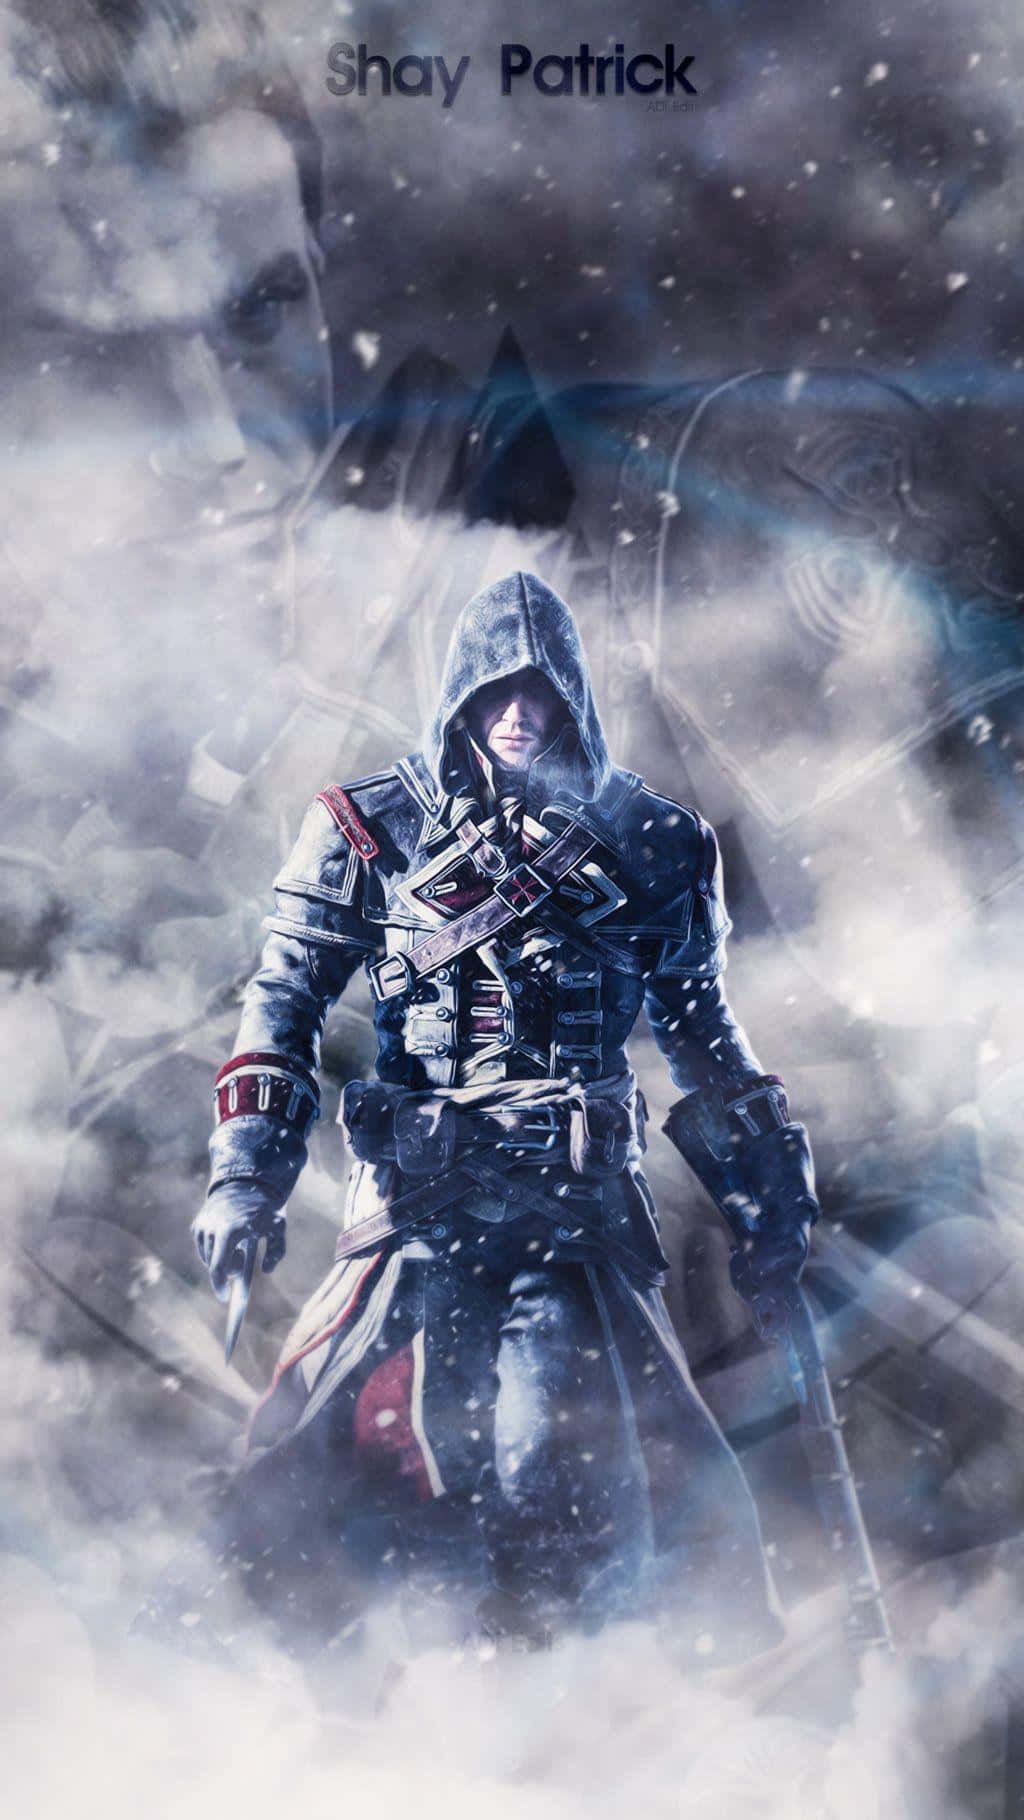 Play Assassins Creed on the go - experience open world action on your Iphone! Wallpaper